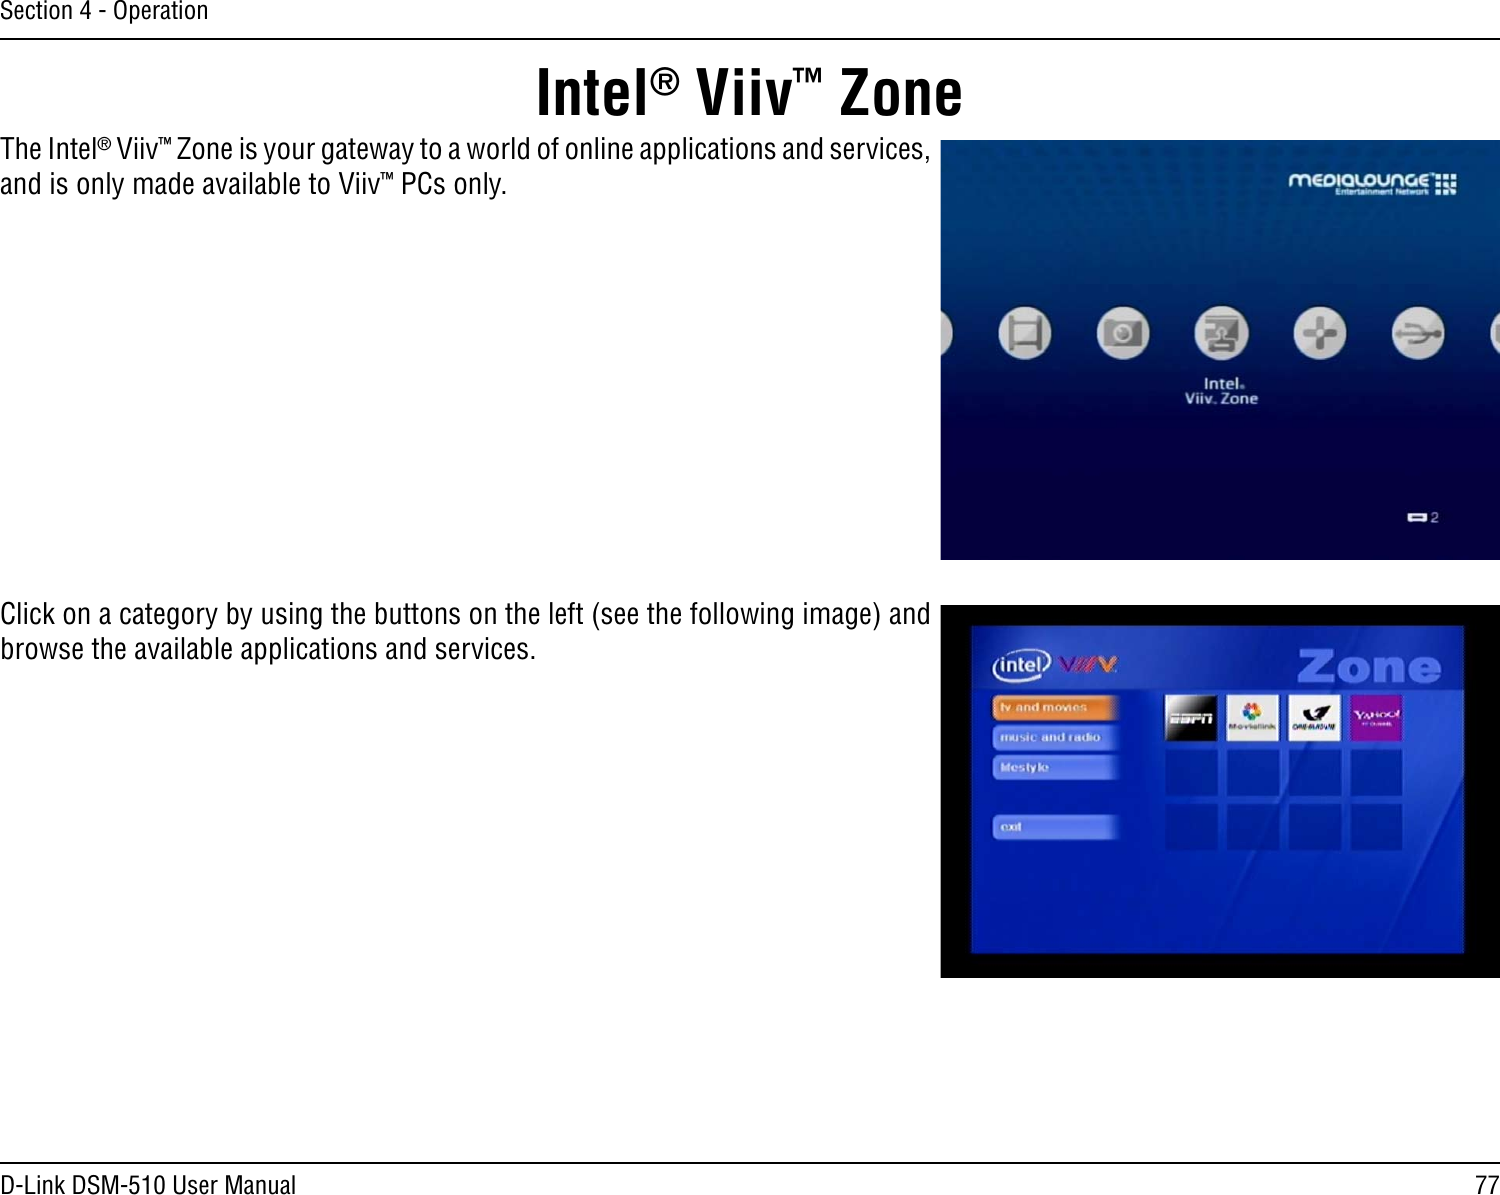 77D-Link DSM-510 User ManualSection 4 - OperationThe Intel® Viiv™ Zone is your gateway to a world of online applications and services, and is only made available to Viiv™ PCs only.Click on a category by using the buttons on the left (see the following image) and browse the available applications and services.Intel® Viiv™ Zone